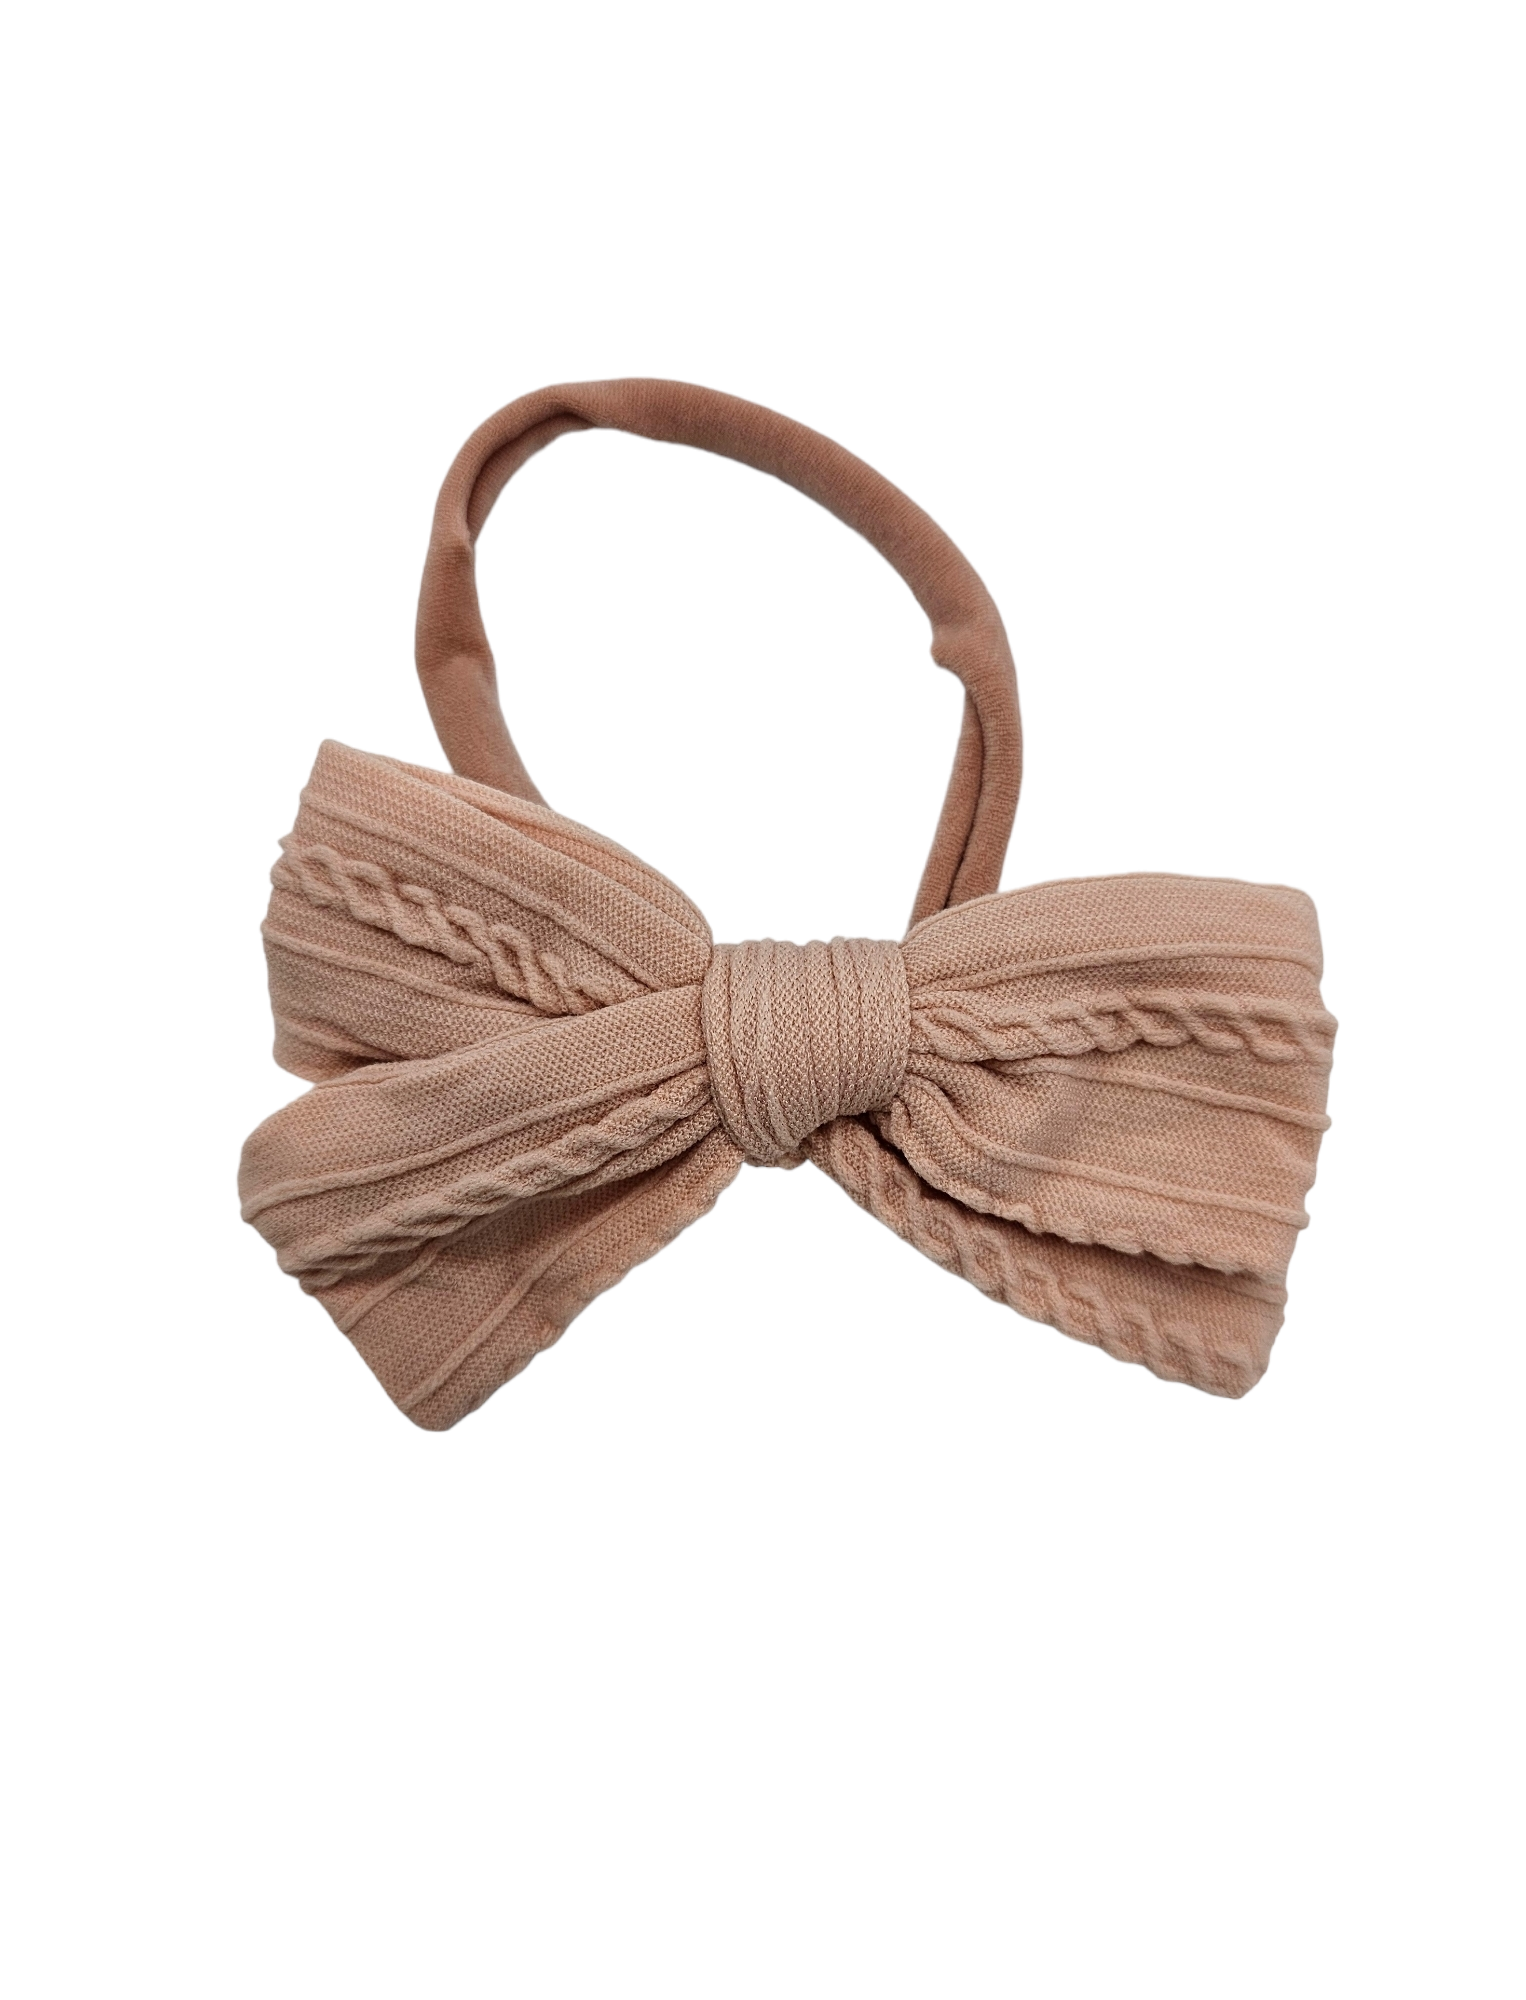 Lighter Dusty Pink 3.5 Inch Cable Knit Dainty Bow Headband - Betty Brown Boutique Ltd